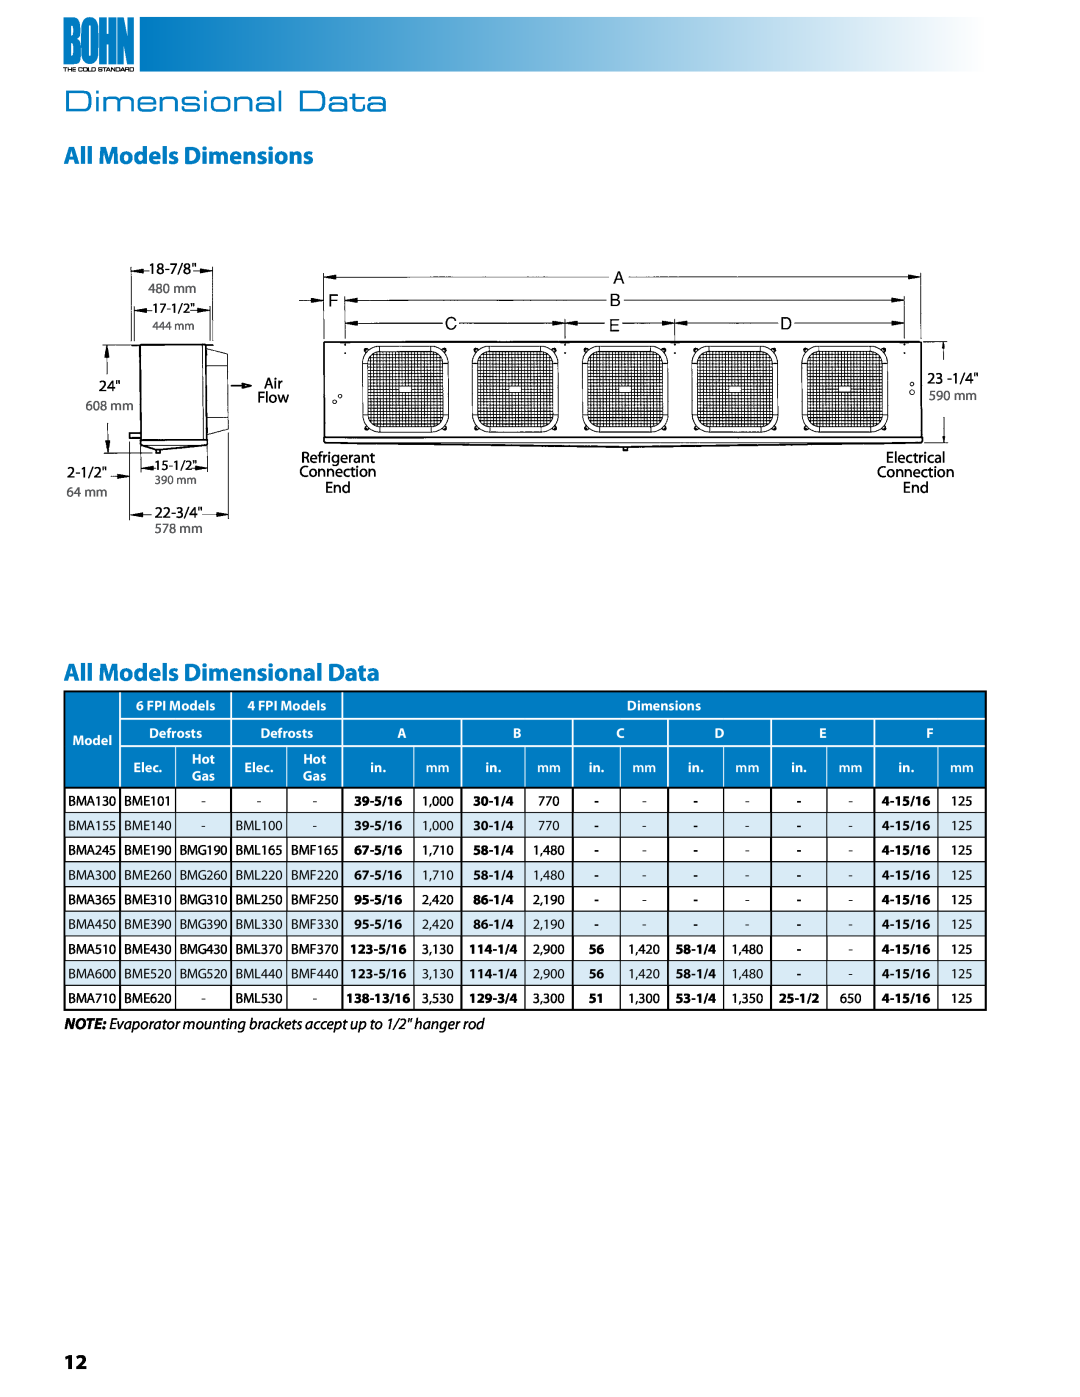 Heatcraft Refrigeration Products BMF All Models Dimensions, All Models Dimensional Data, 480 mm, 590 mm, 64 mm, 578 mm 